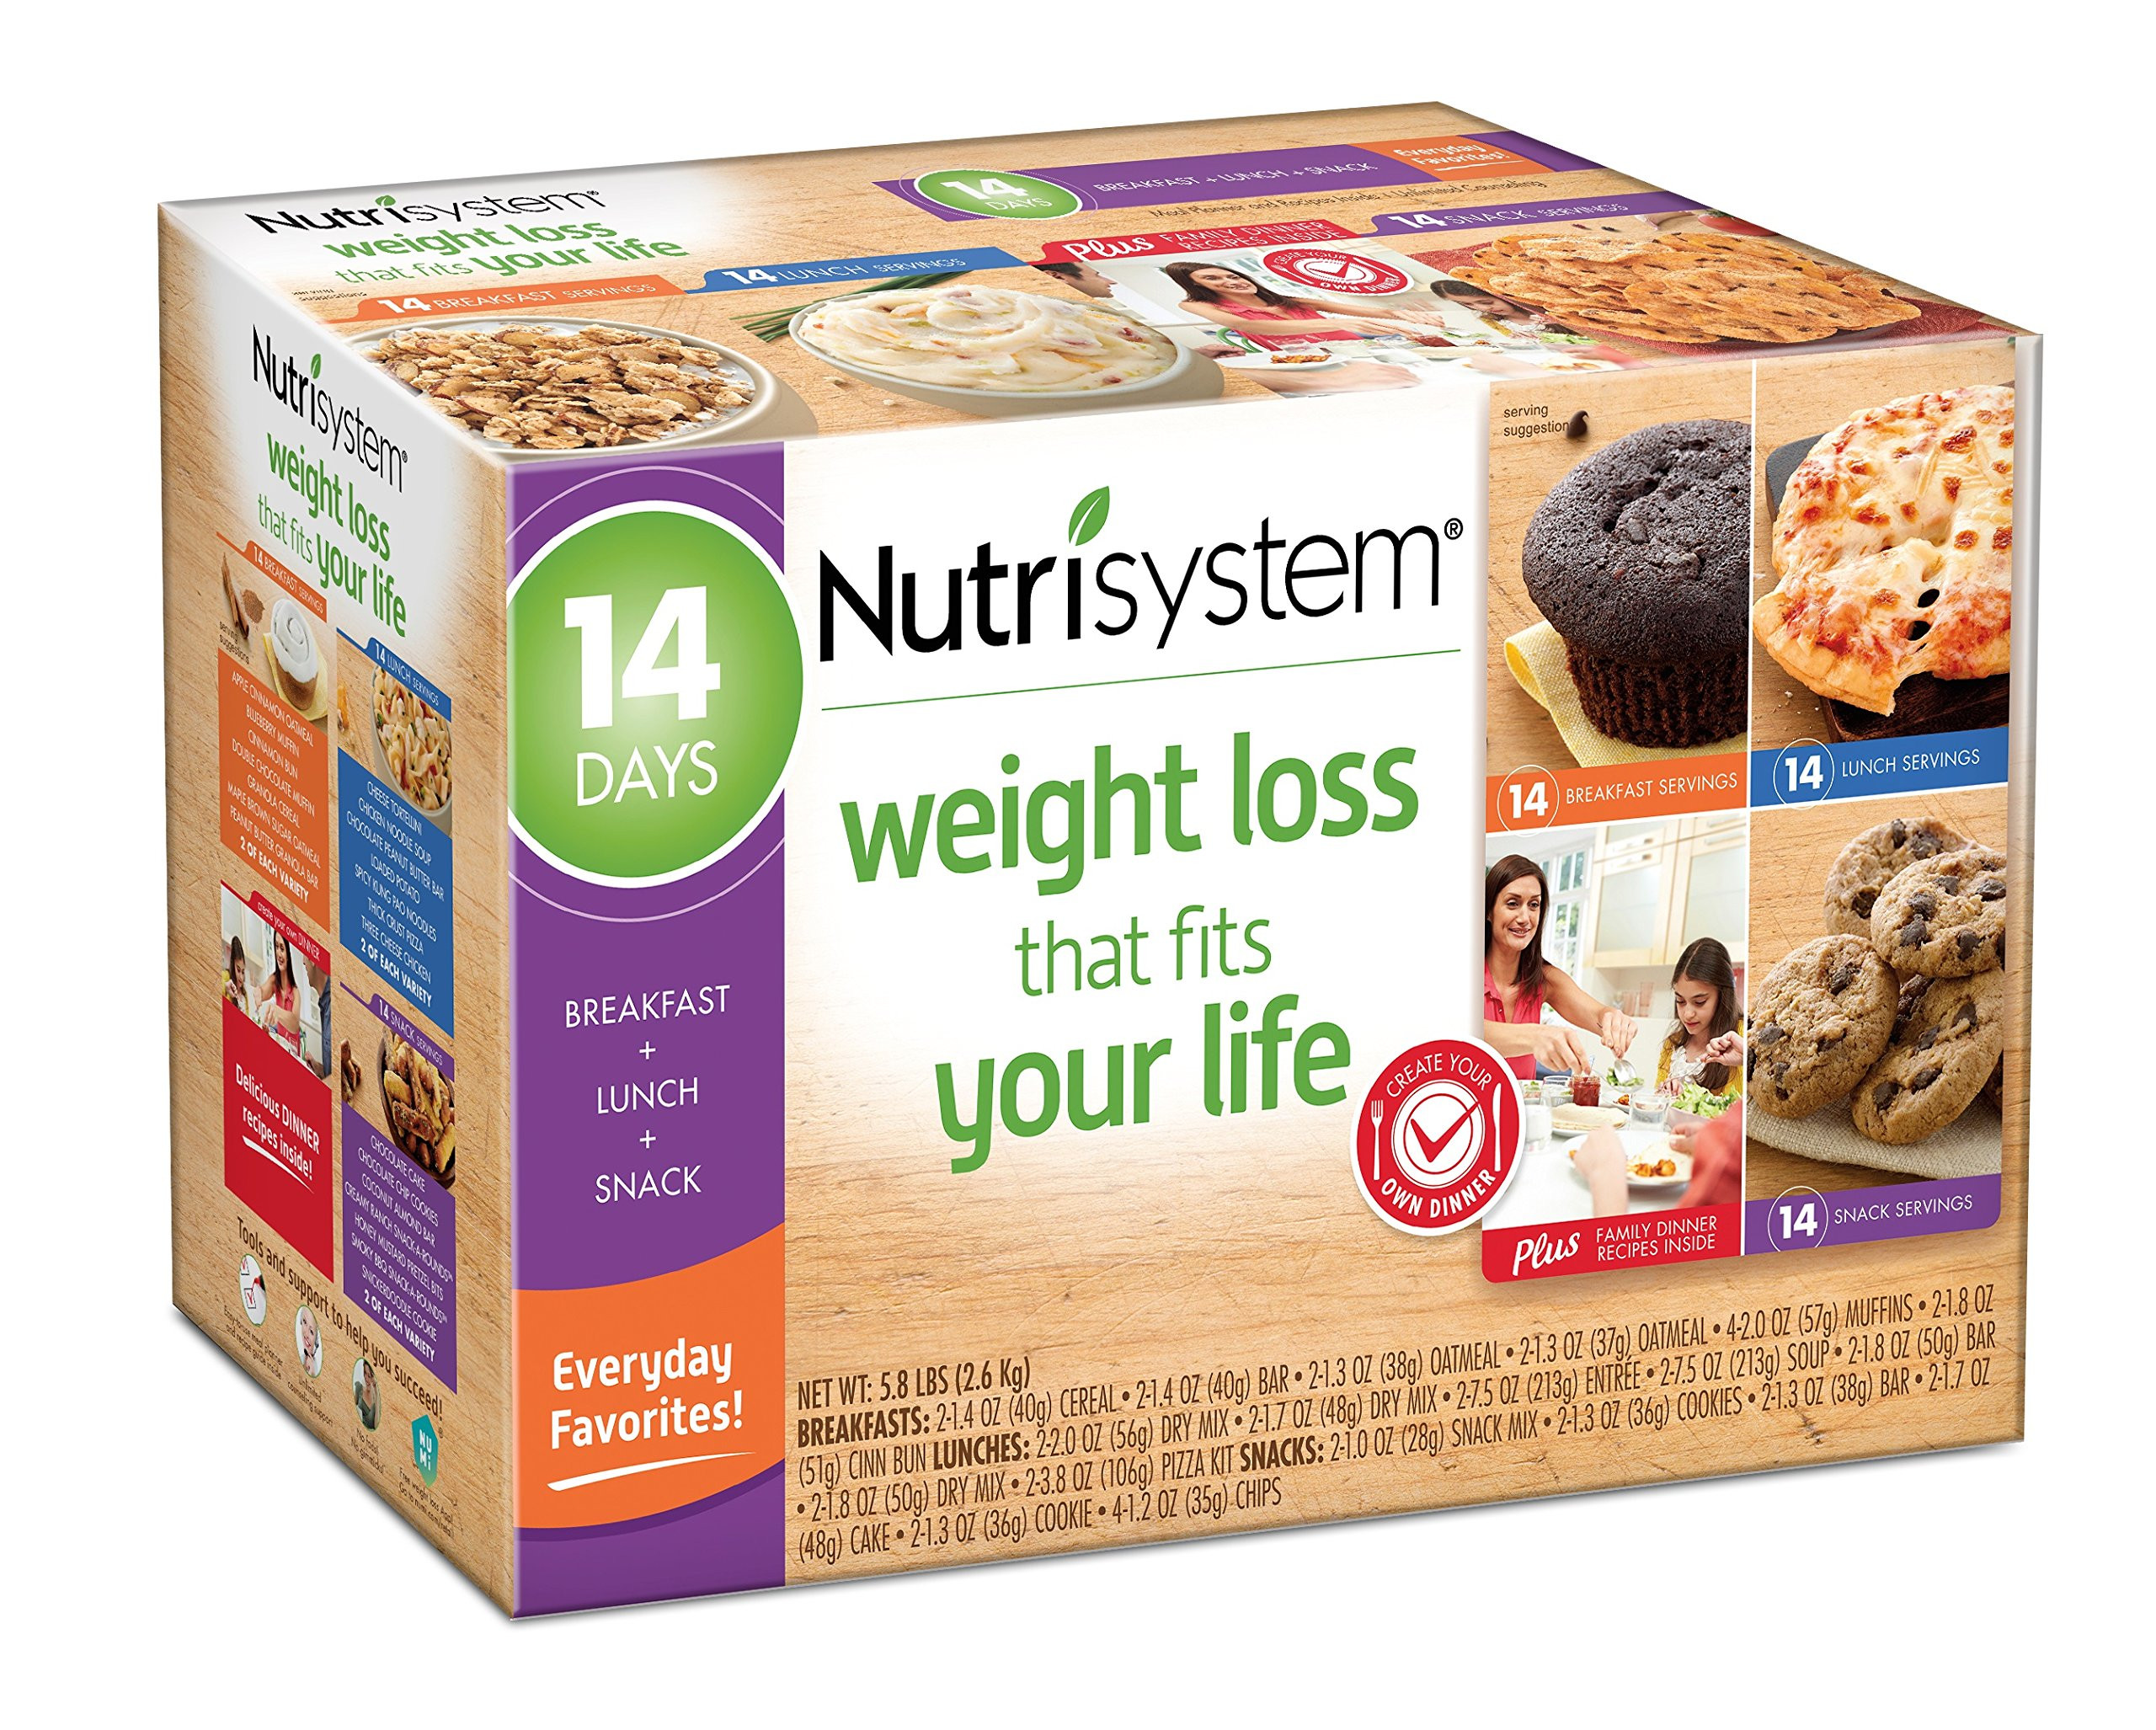 14 Day Weight Loss Meal Plan
 Best Nutrisystem Meal Plan 14 Day Everyday Kit Weight Loss